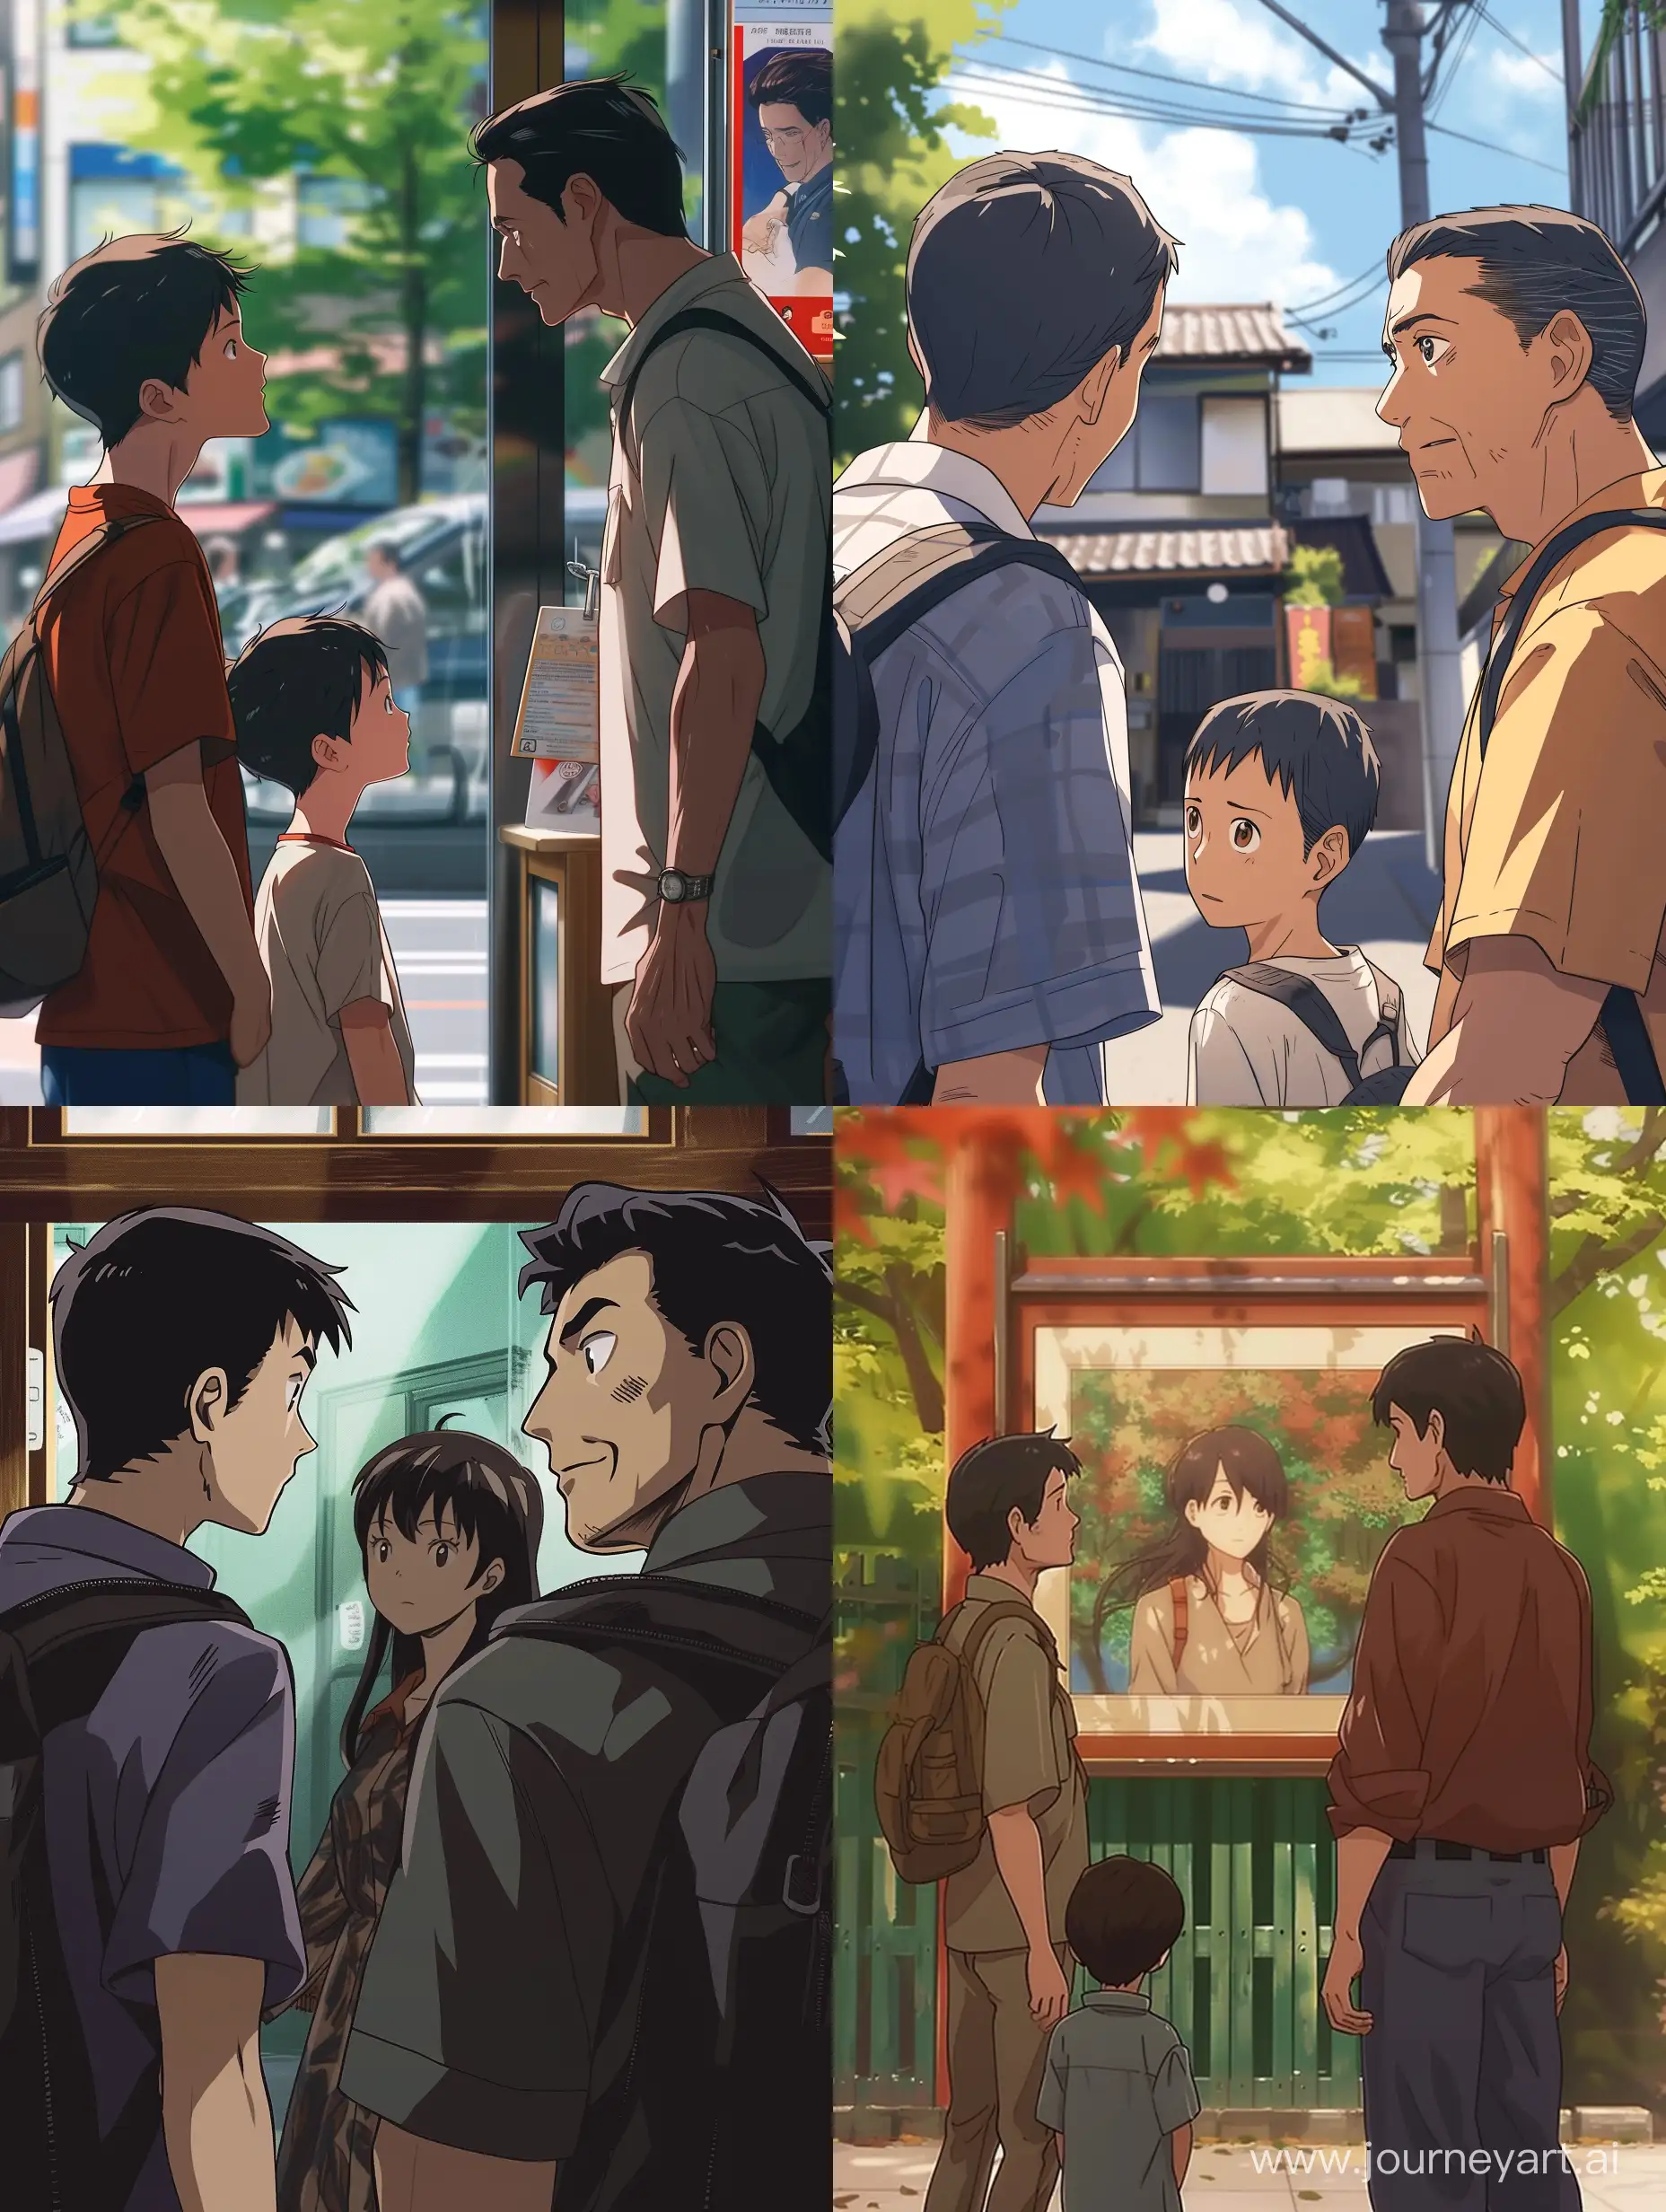 A father and a son looking at a lady in anime